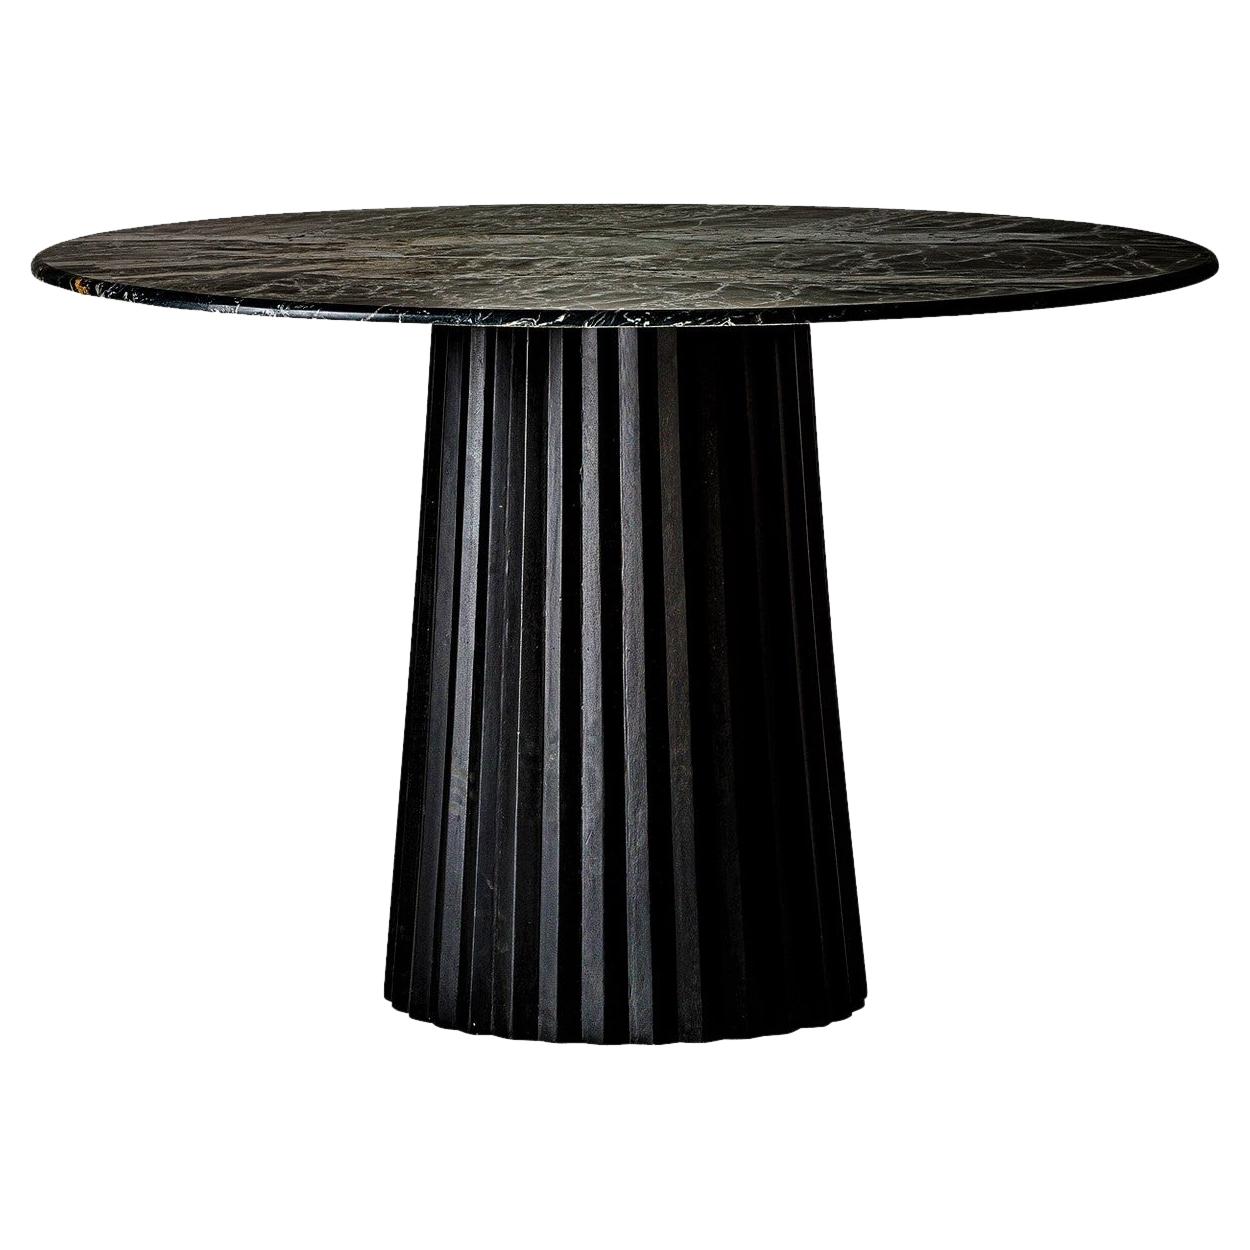 1970s Italian Design Style Marble and Wooden Round Dining Pedestal Table